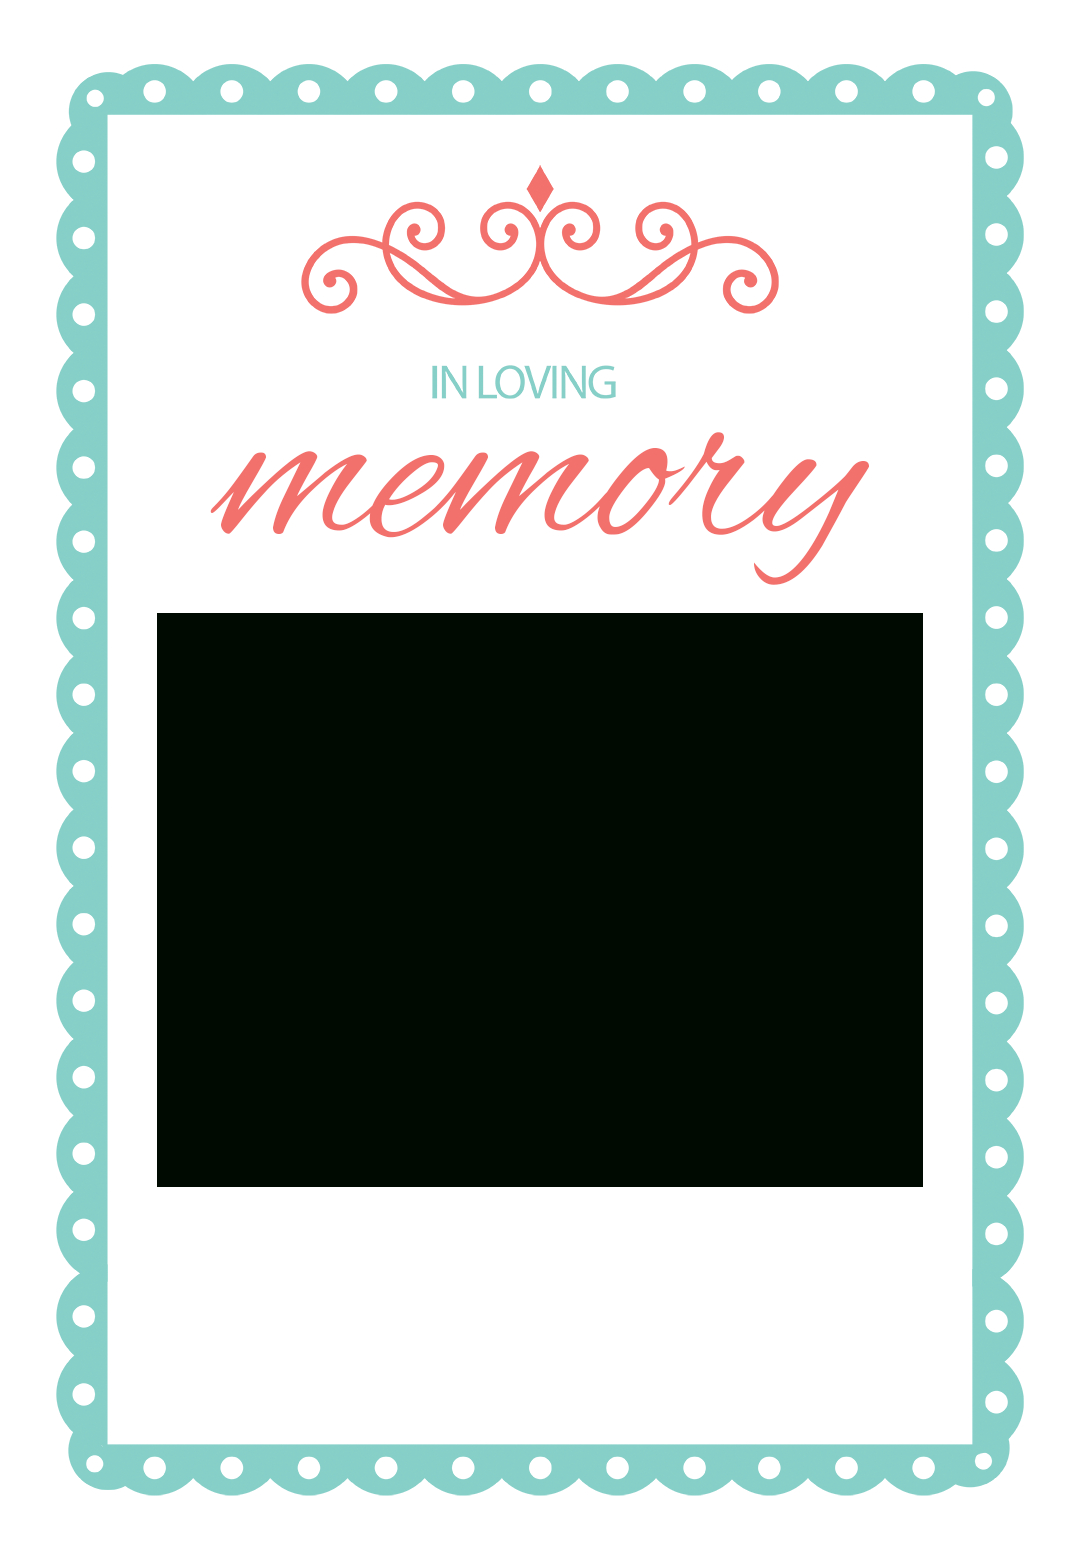 001 In Loving Memory Template Free Fantastic Ideas Card With In Memory Cards Templates